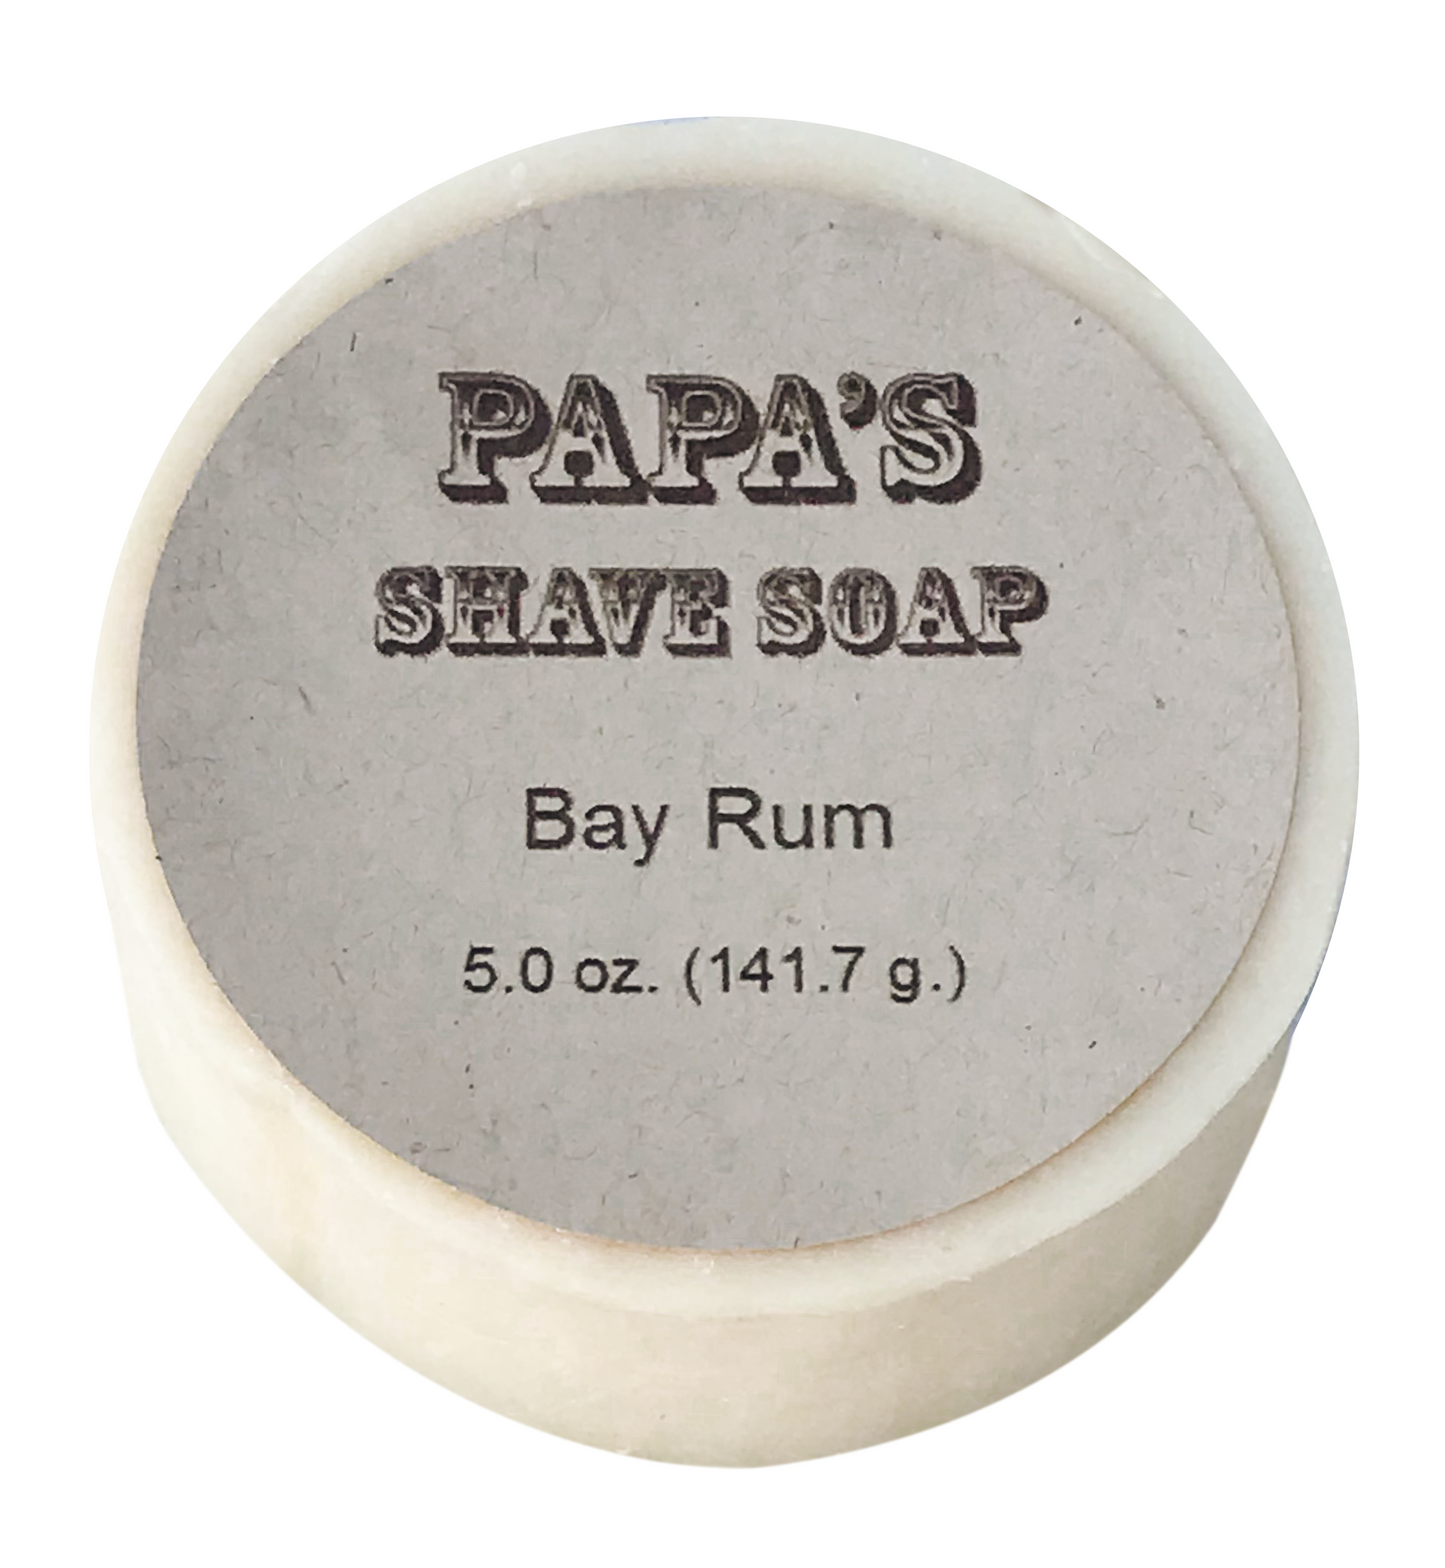 PAPA's Shave Soap           (Bay Rum)